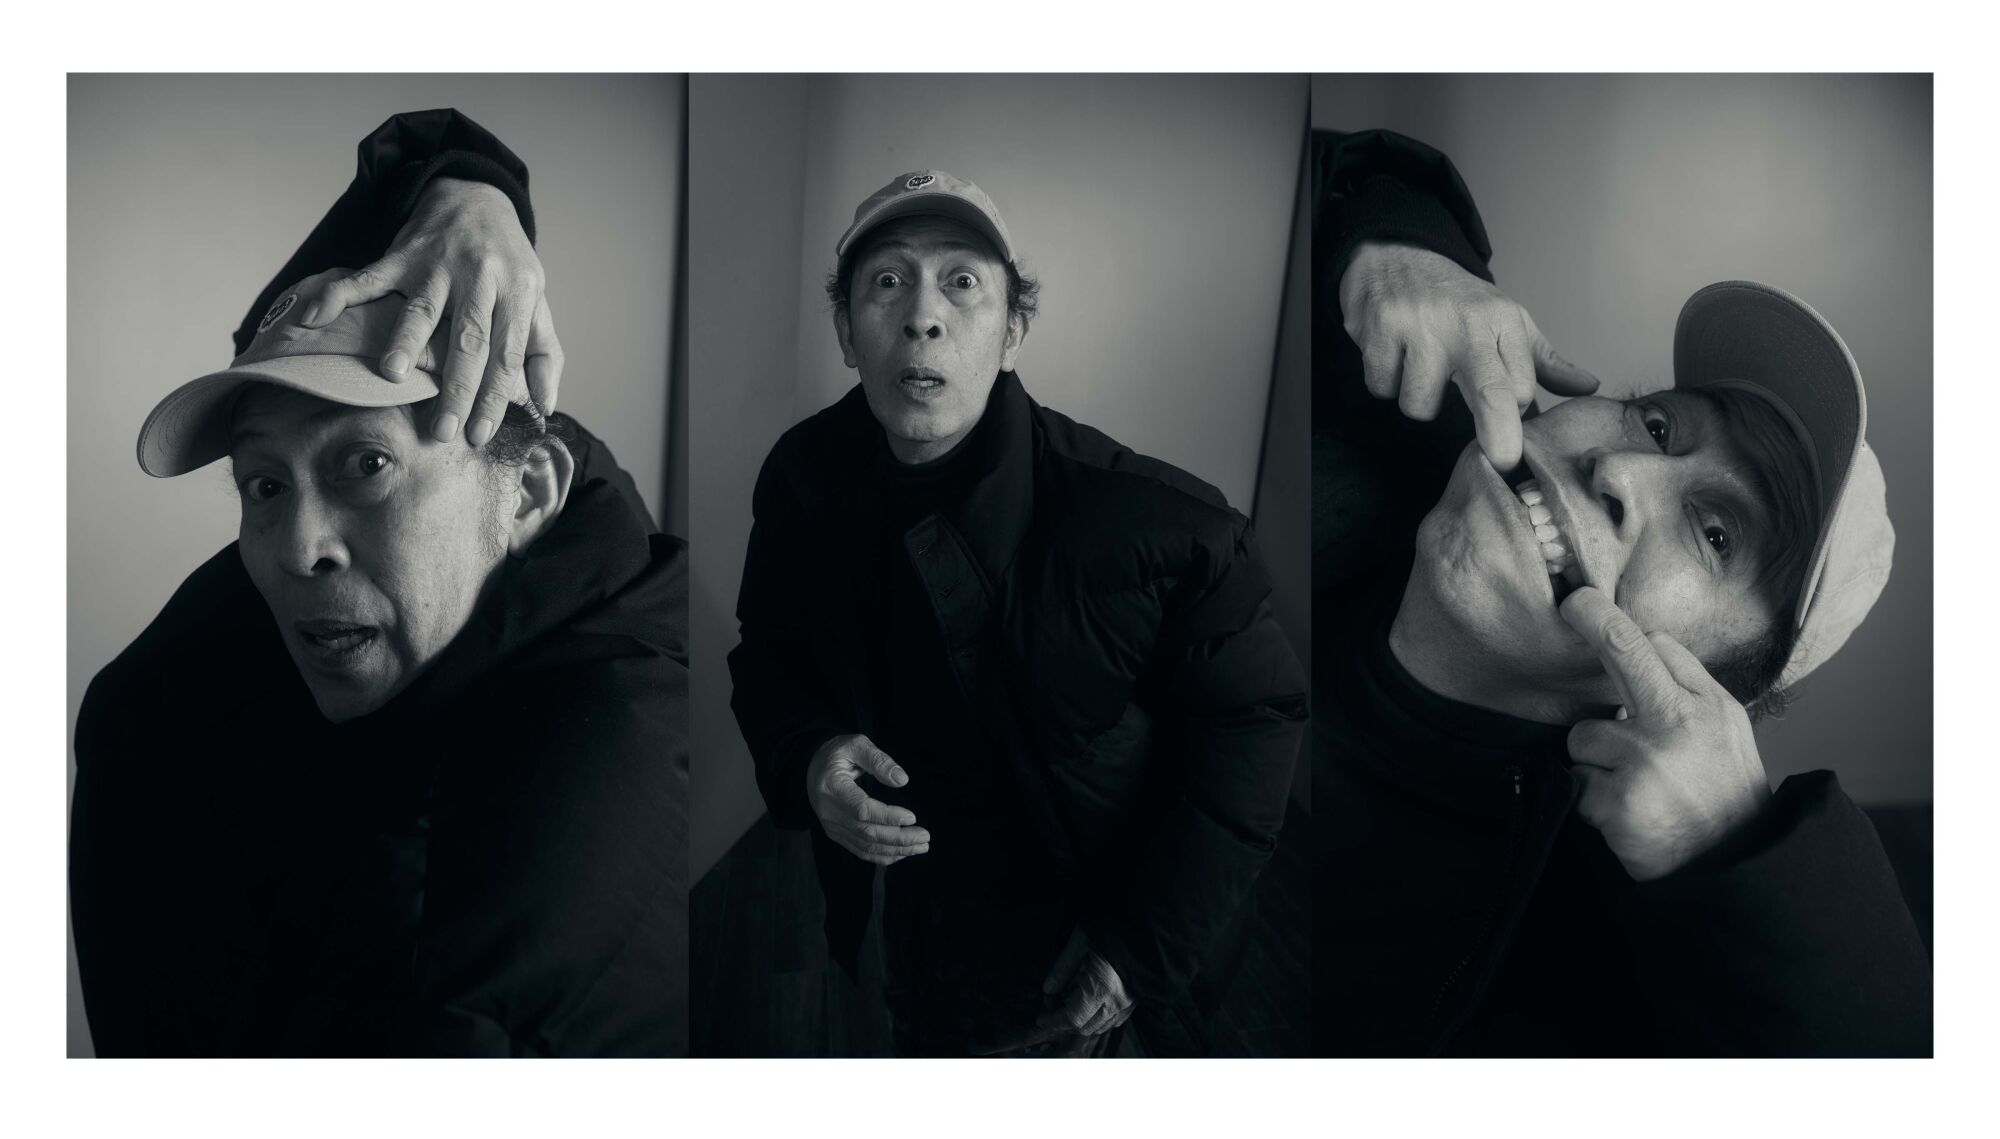 A triptych of a man posing for the camera